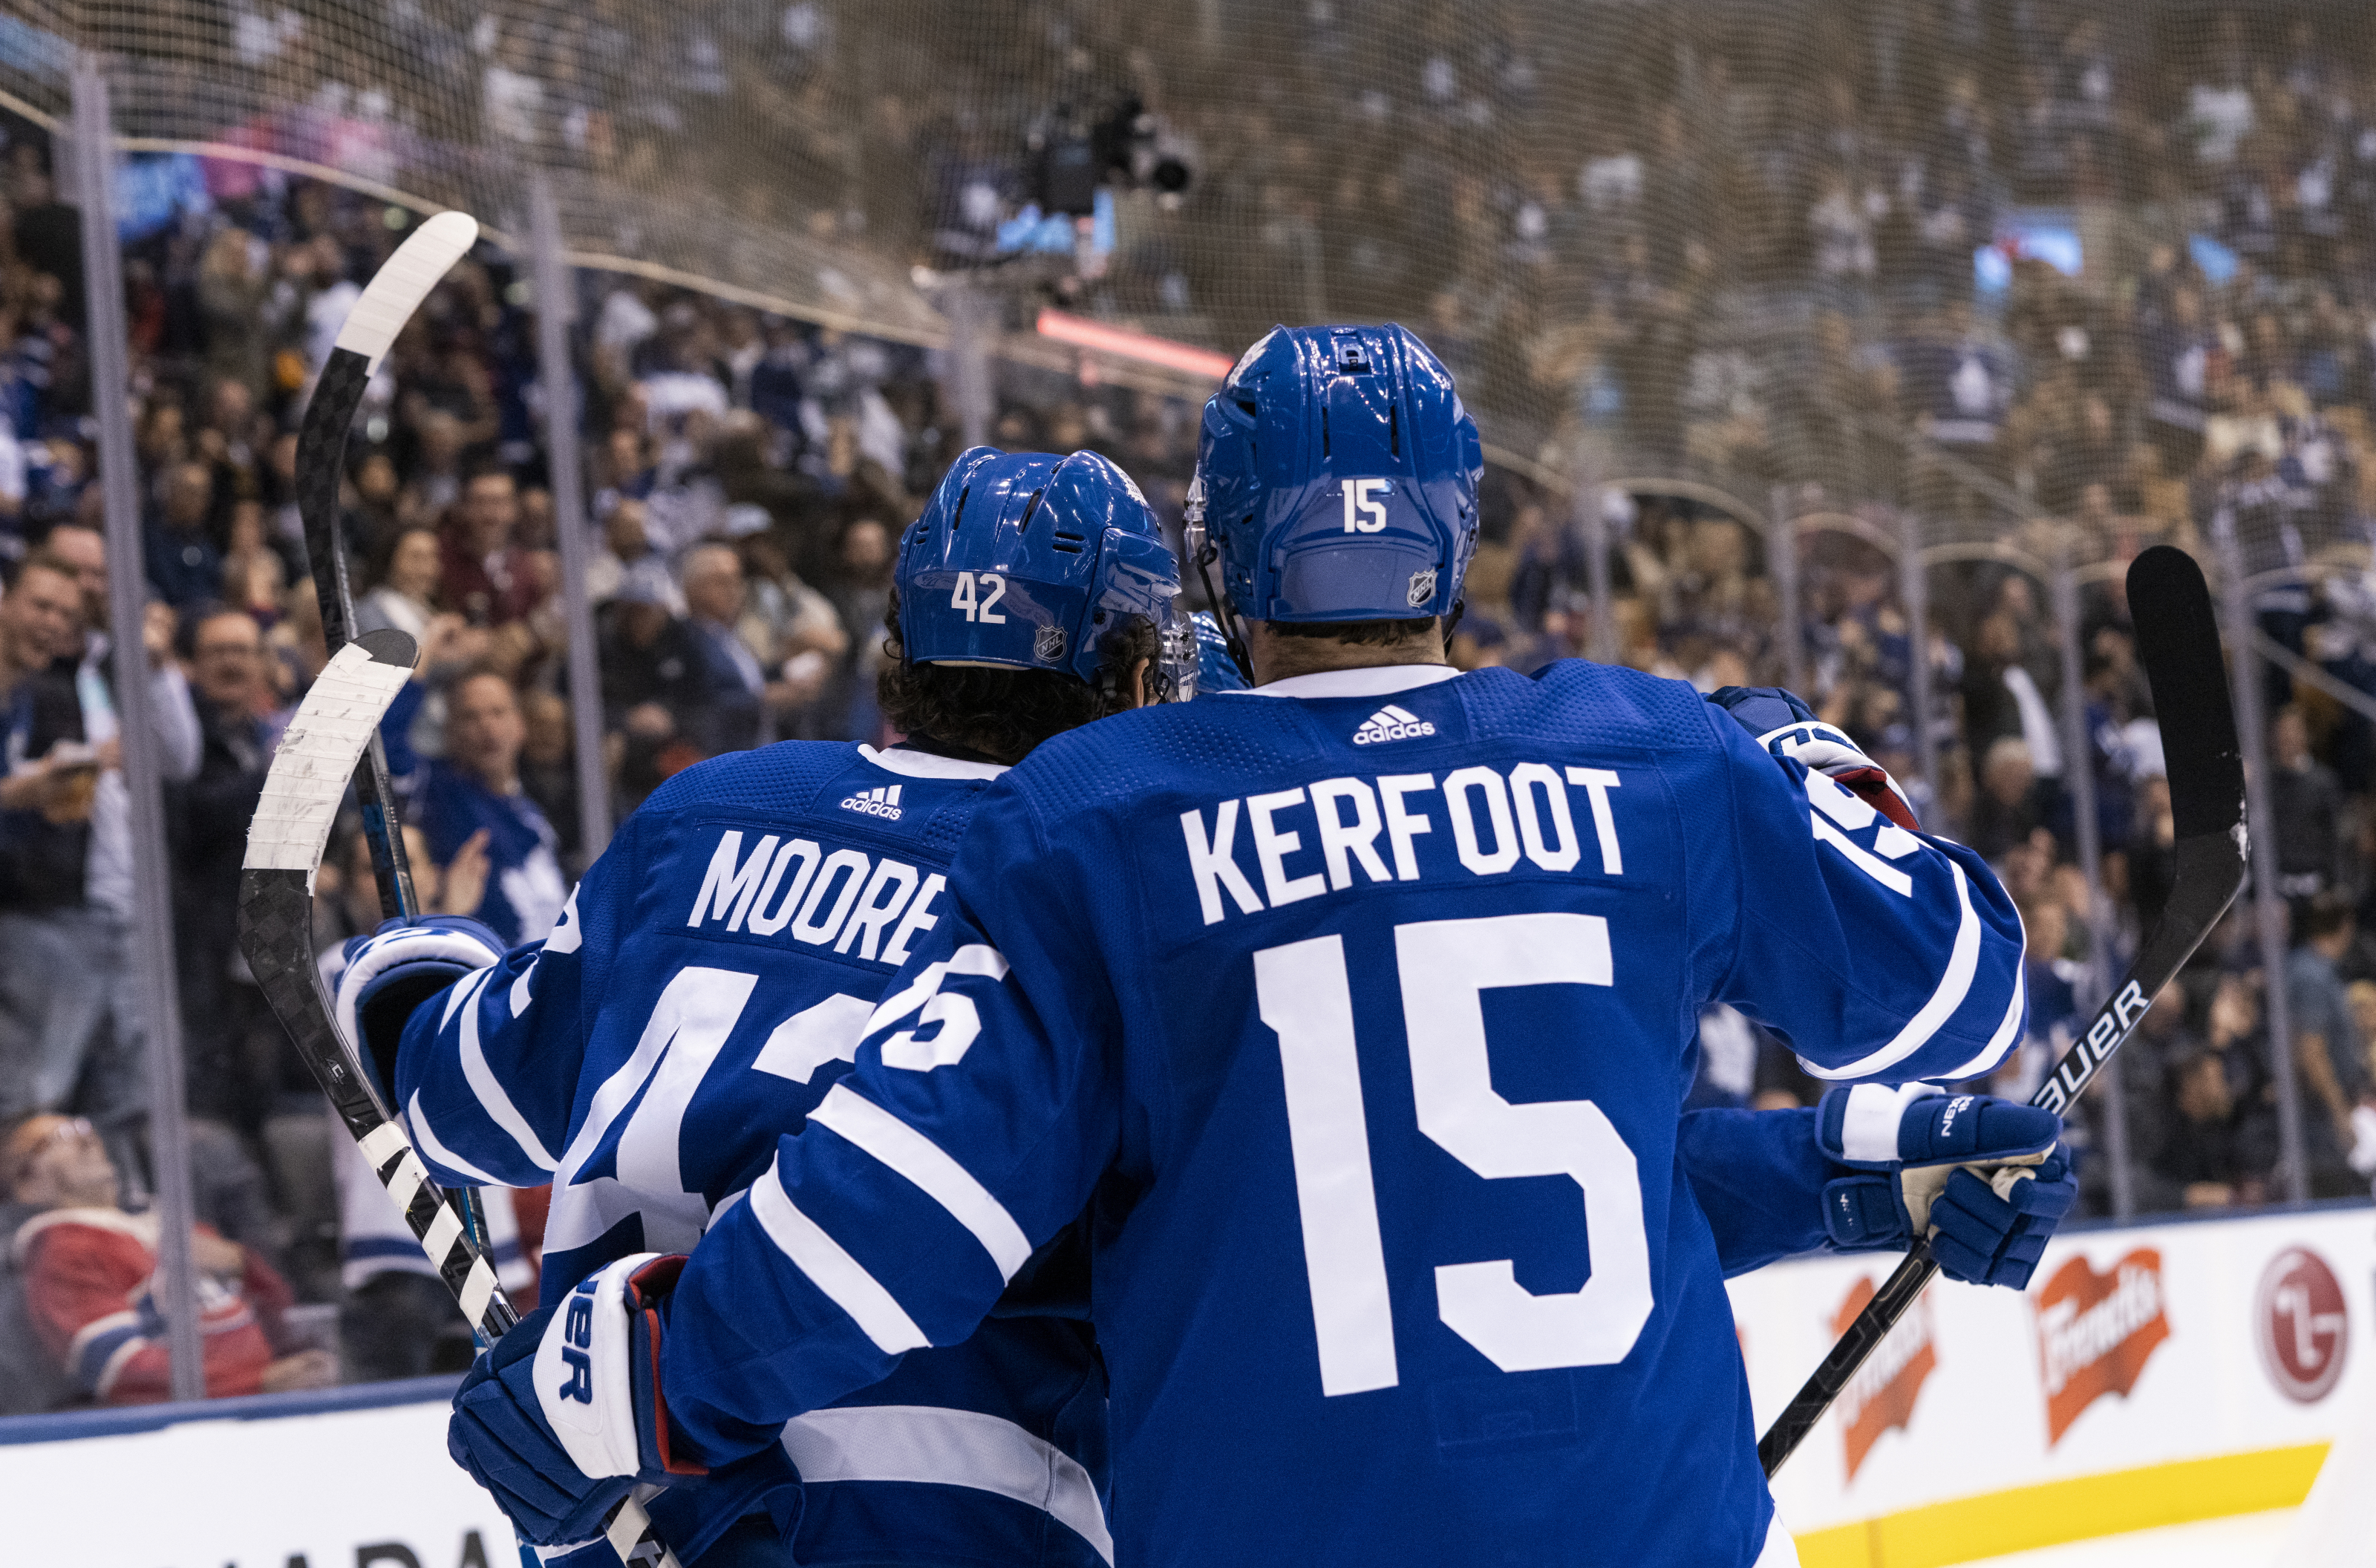 Toronto Maple Leafs - The Maple Leafs acknowledge the importance